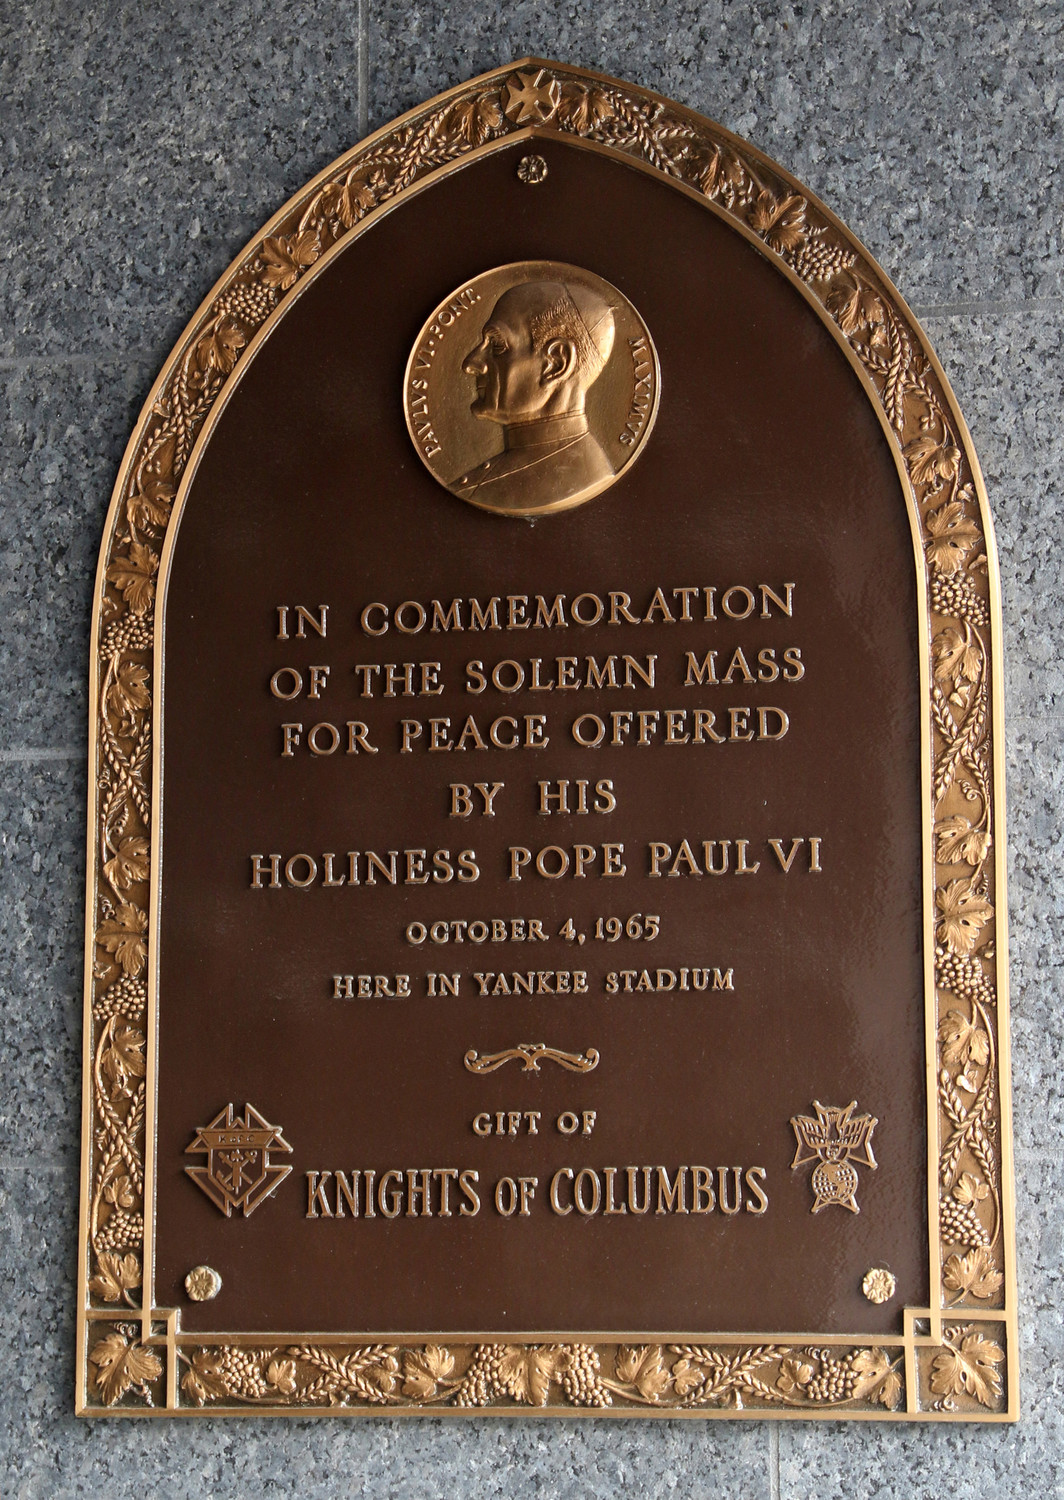 A bronze plaque commemorating the Mass celebrated by Pope Paul VI Oct. 4, 1965, in New York is seen July 30 in Monument Park at Yankee Stadium in the Bronx, N.Y. Blessed Paul, who will be canonized on Oct. 14, offered a “Mass for Peace” at the original Yankee Stadium during his one-day visit to New York, which marked the first trip by a Pope to the Western Hemisphere.